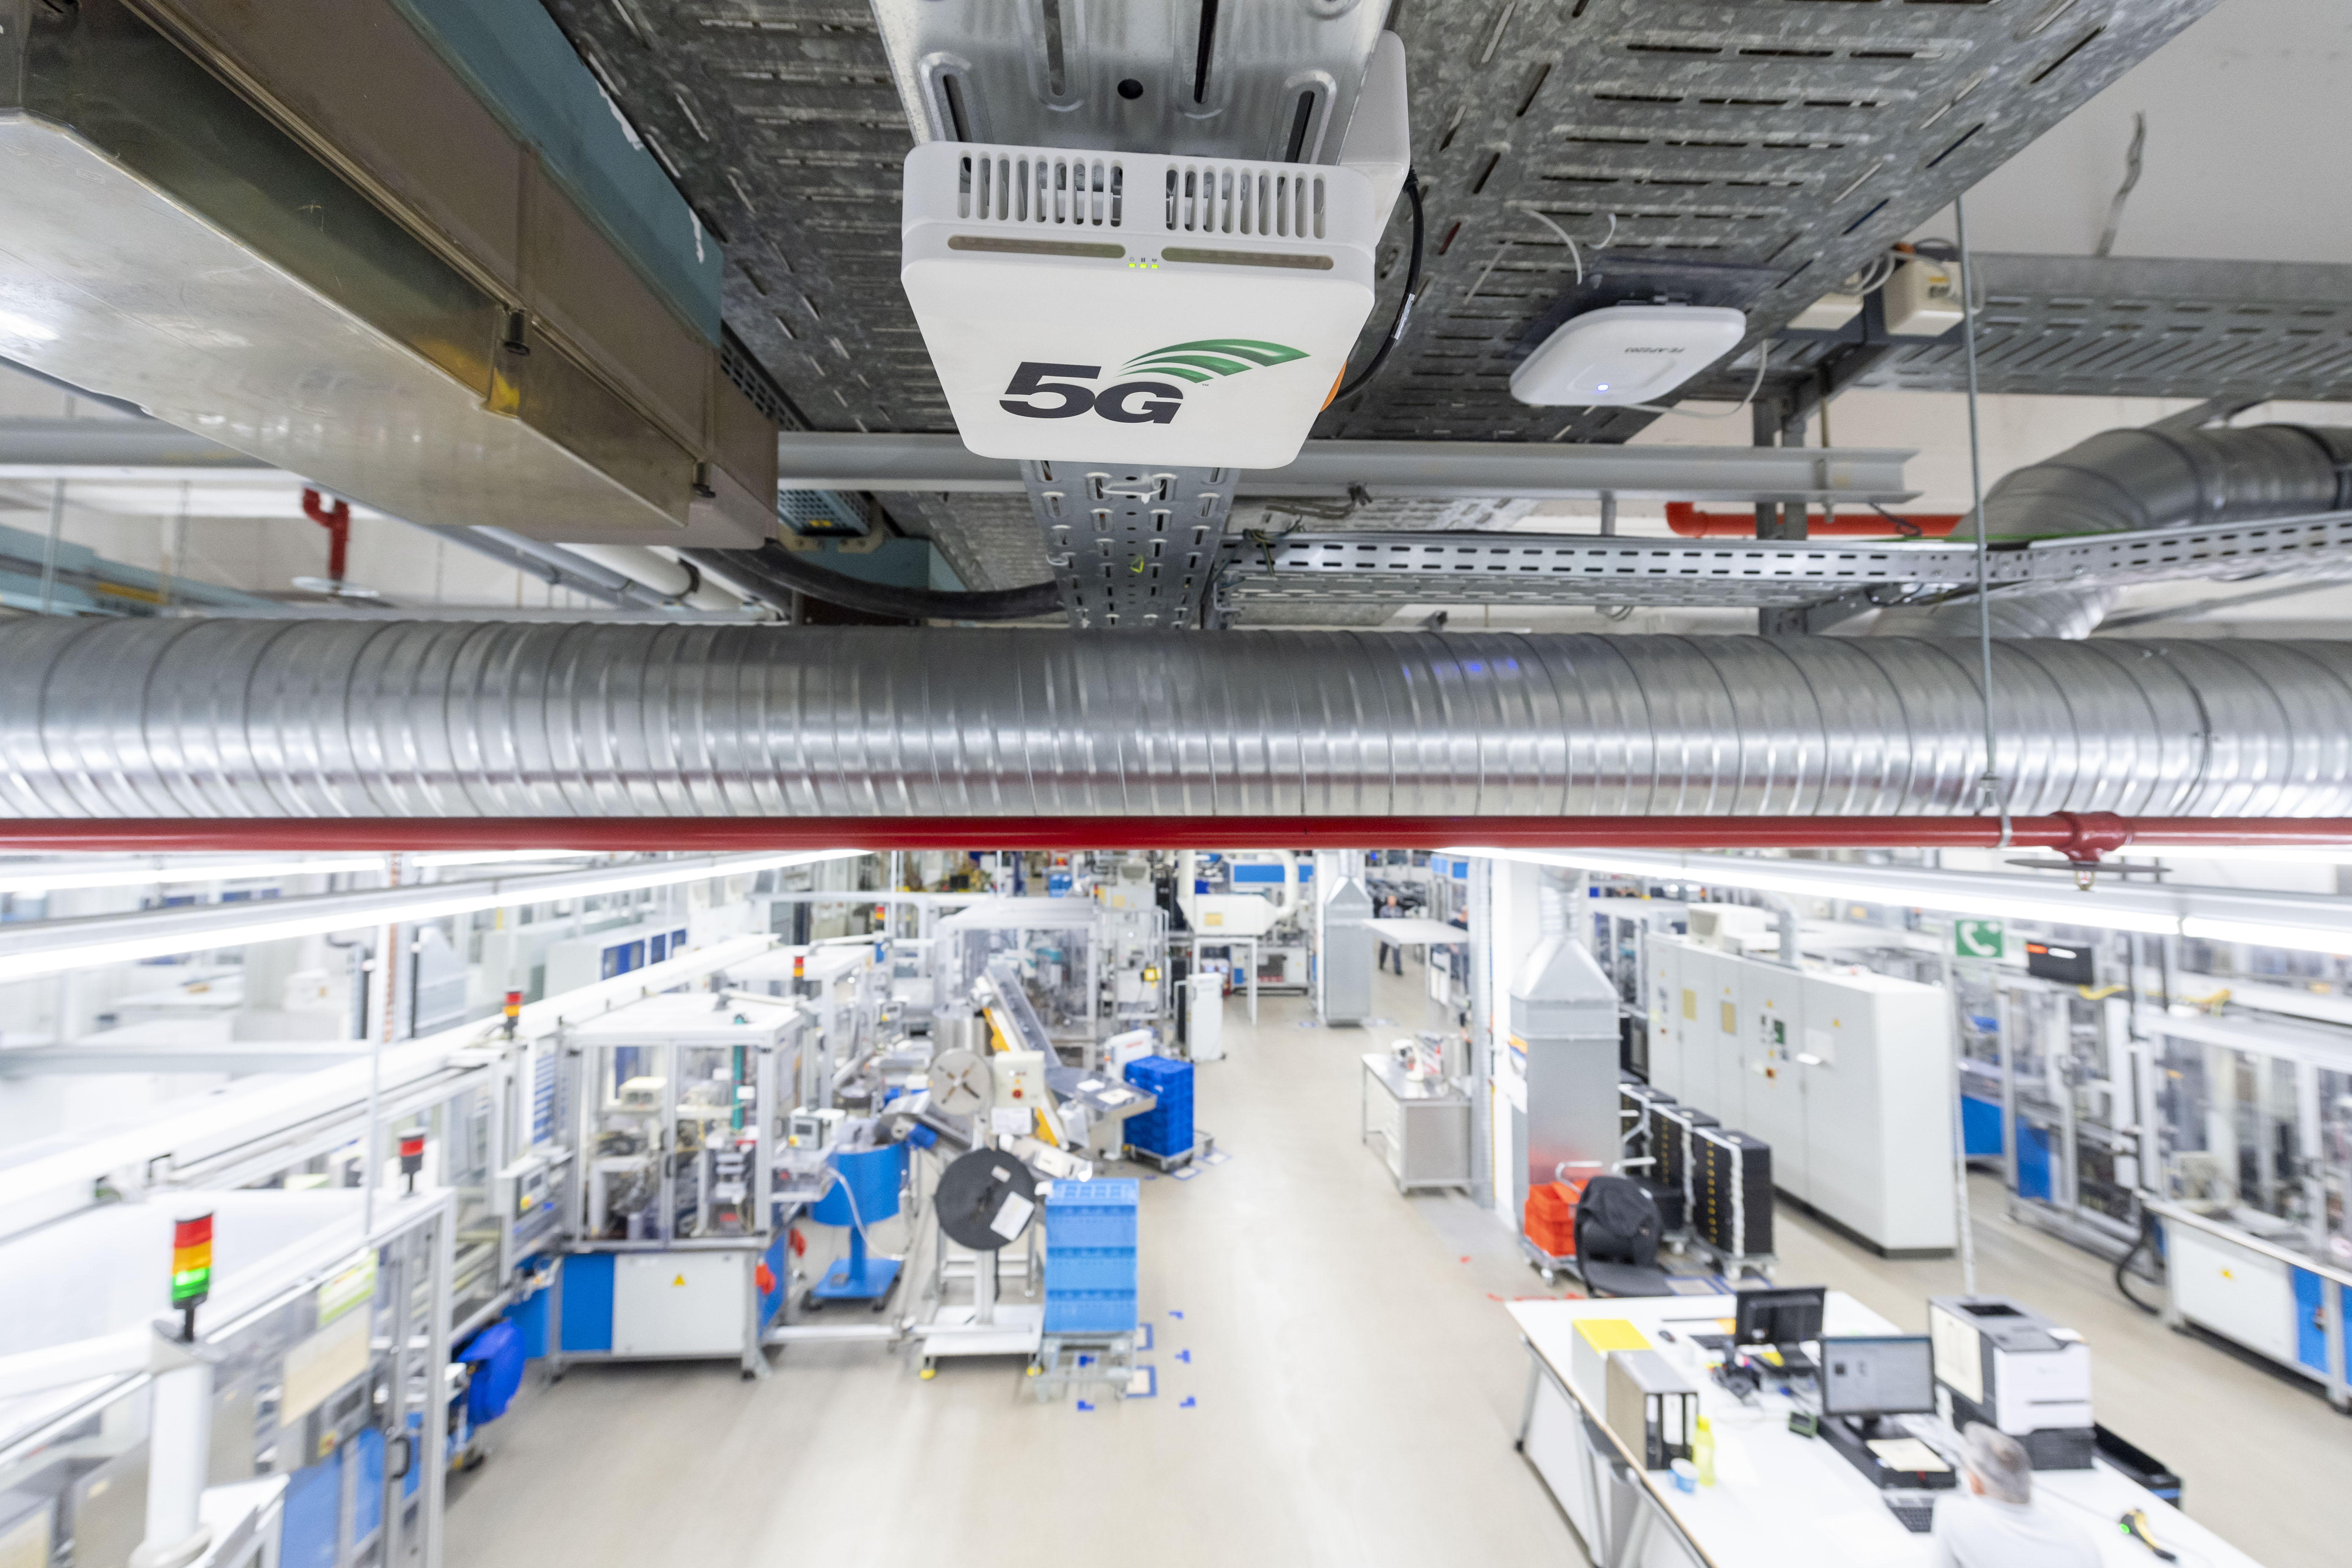 “Small cells” ensure good signal reception throughout the manufacturing facility 